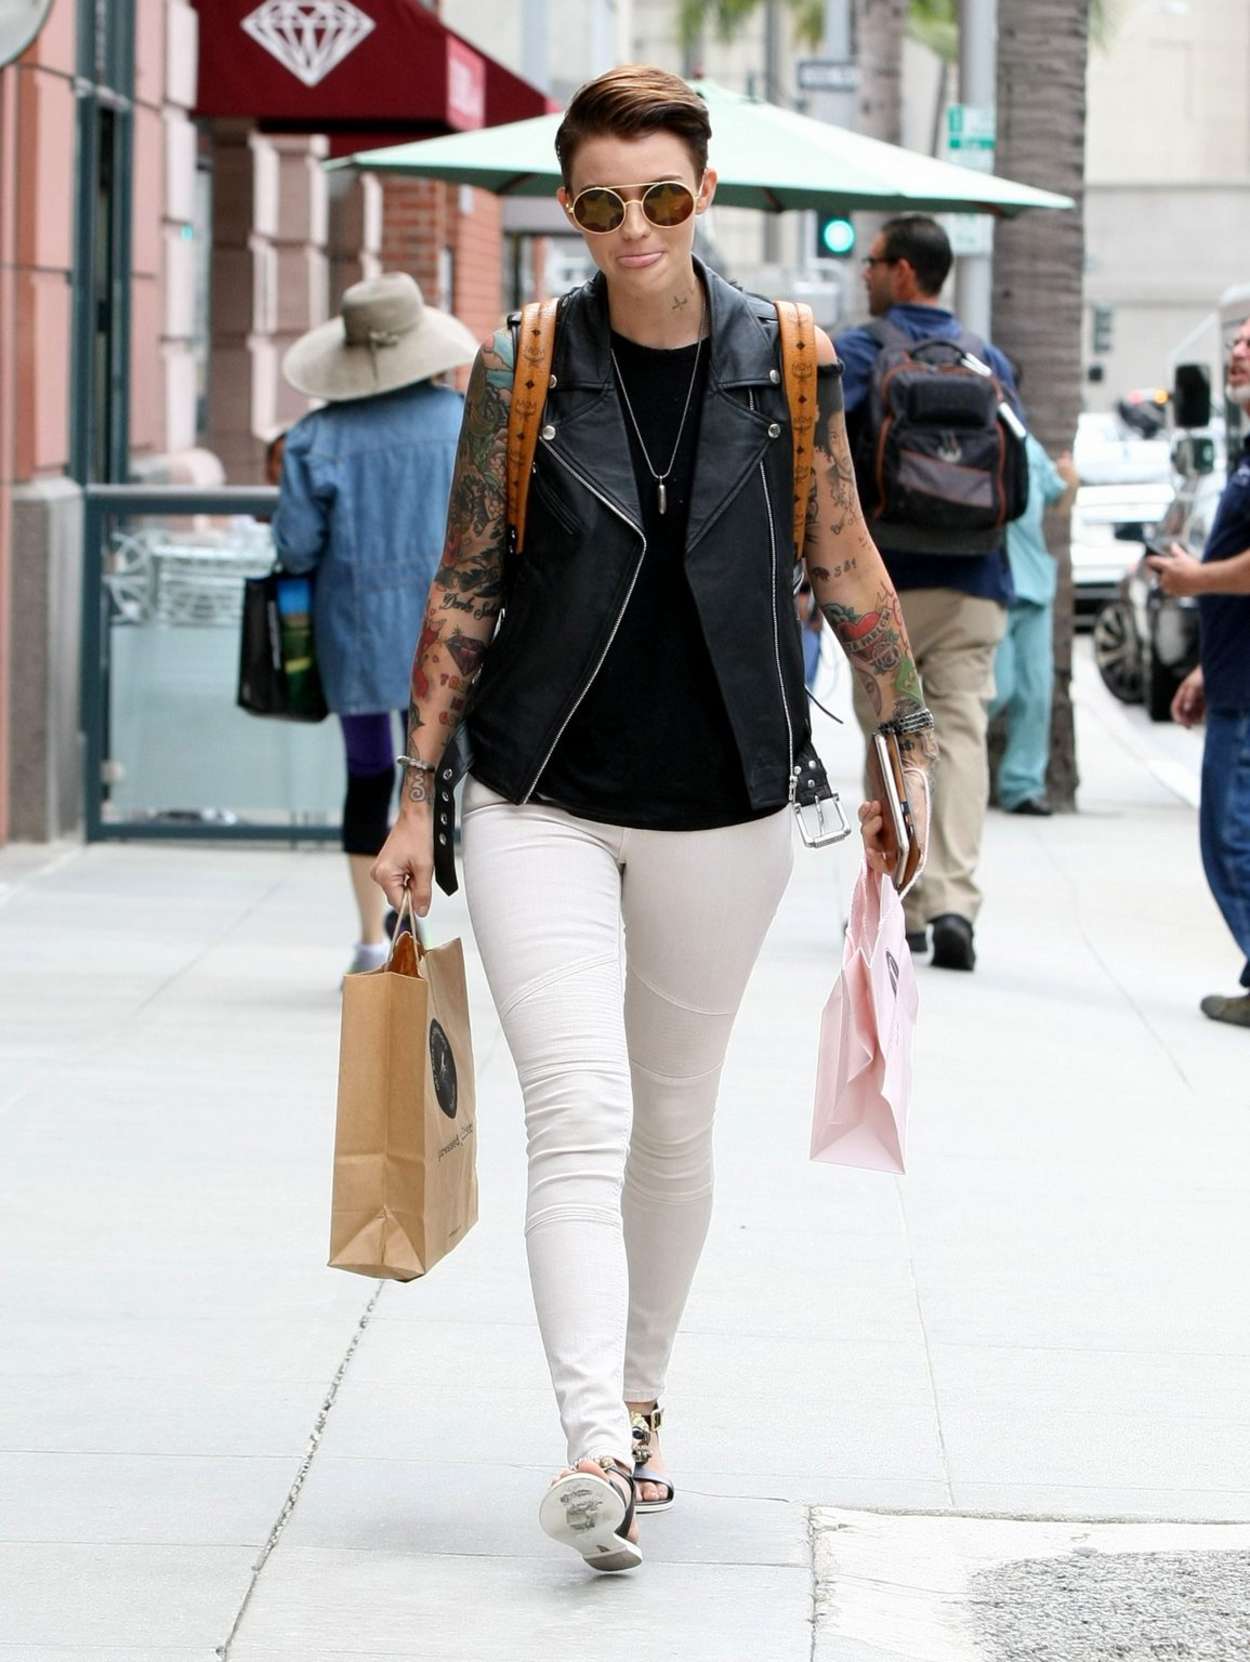 Ruby Rose Booty in Jeans -08 GotCeleb.